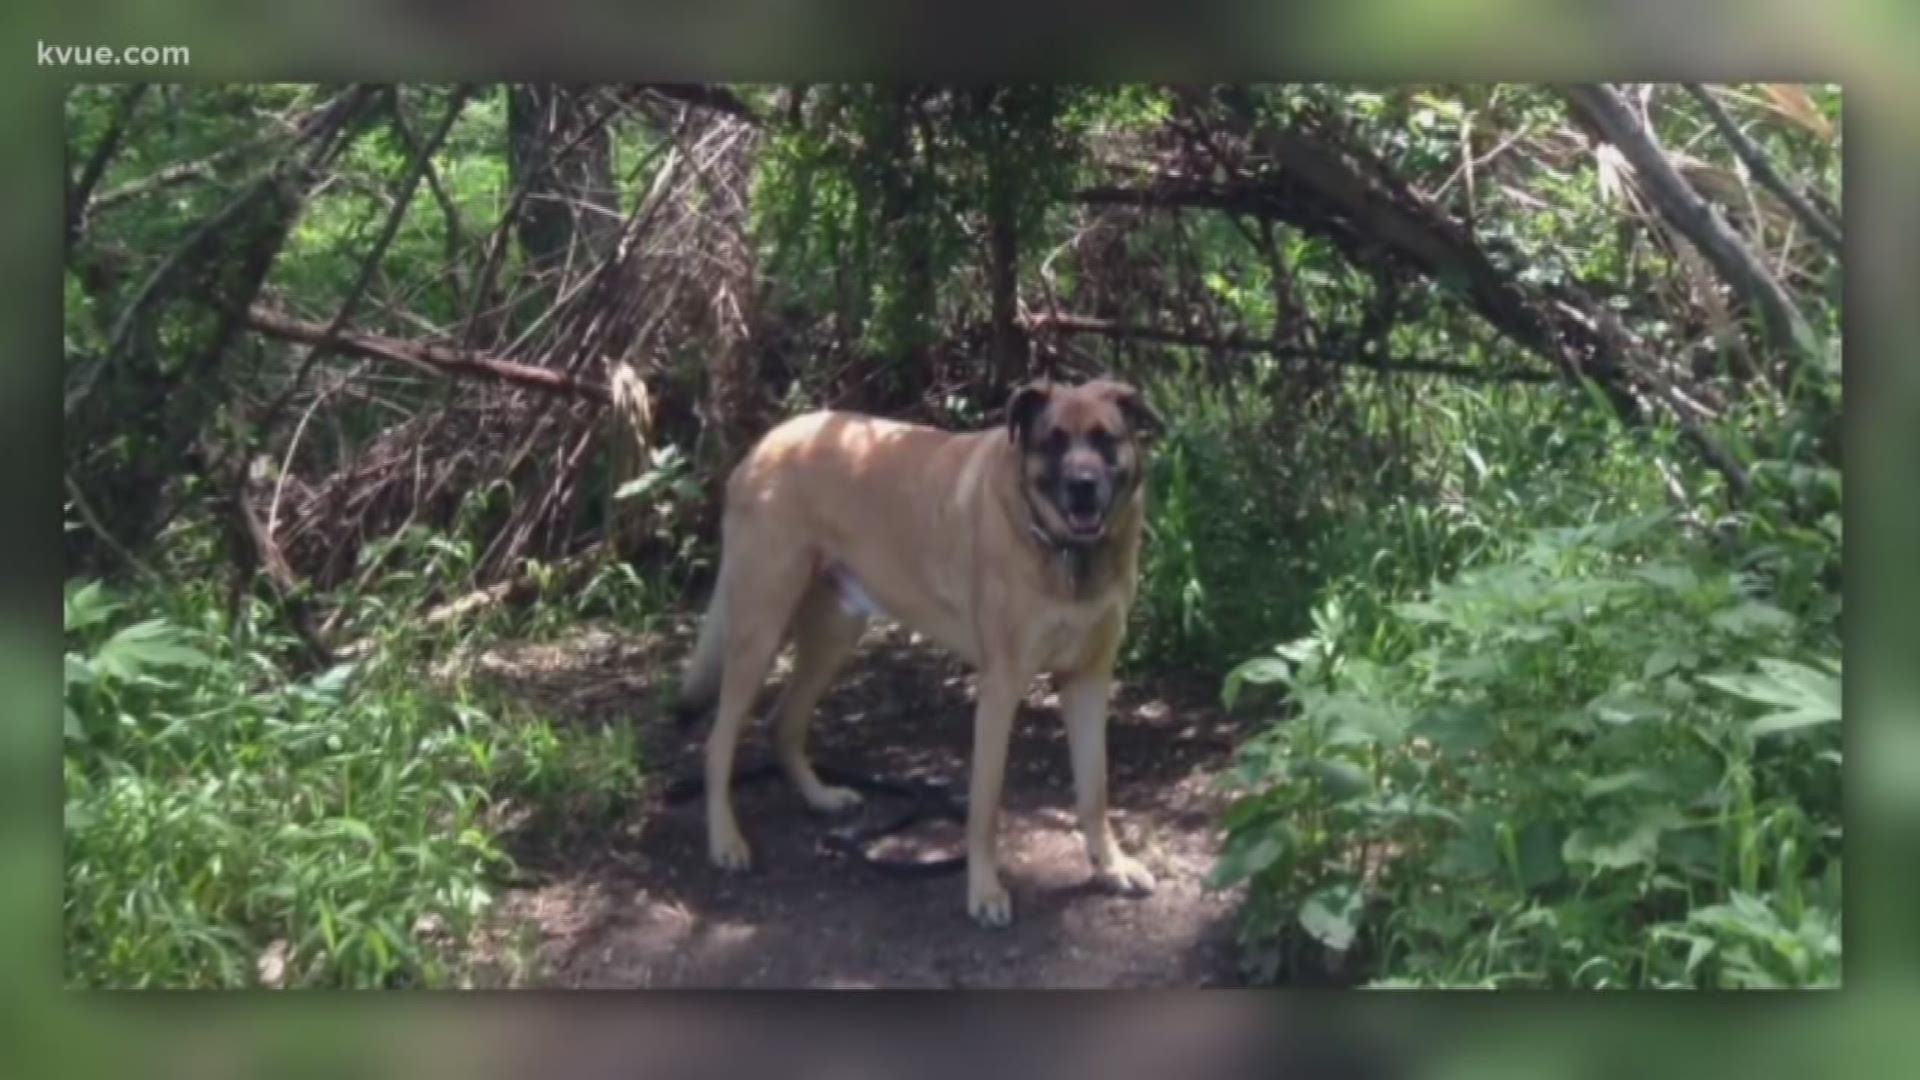 Instead of celebrating the start of the new year, a South Austin man says he had to bury his beloved dog.